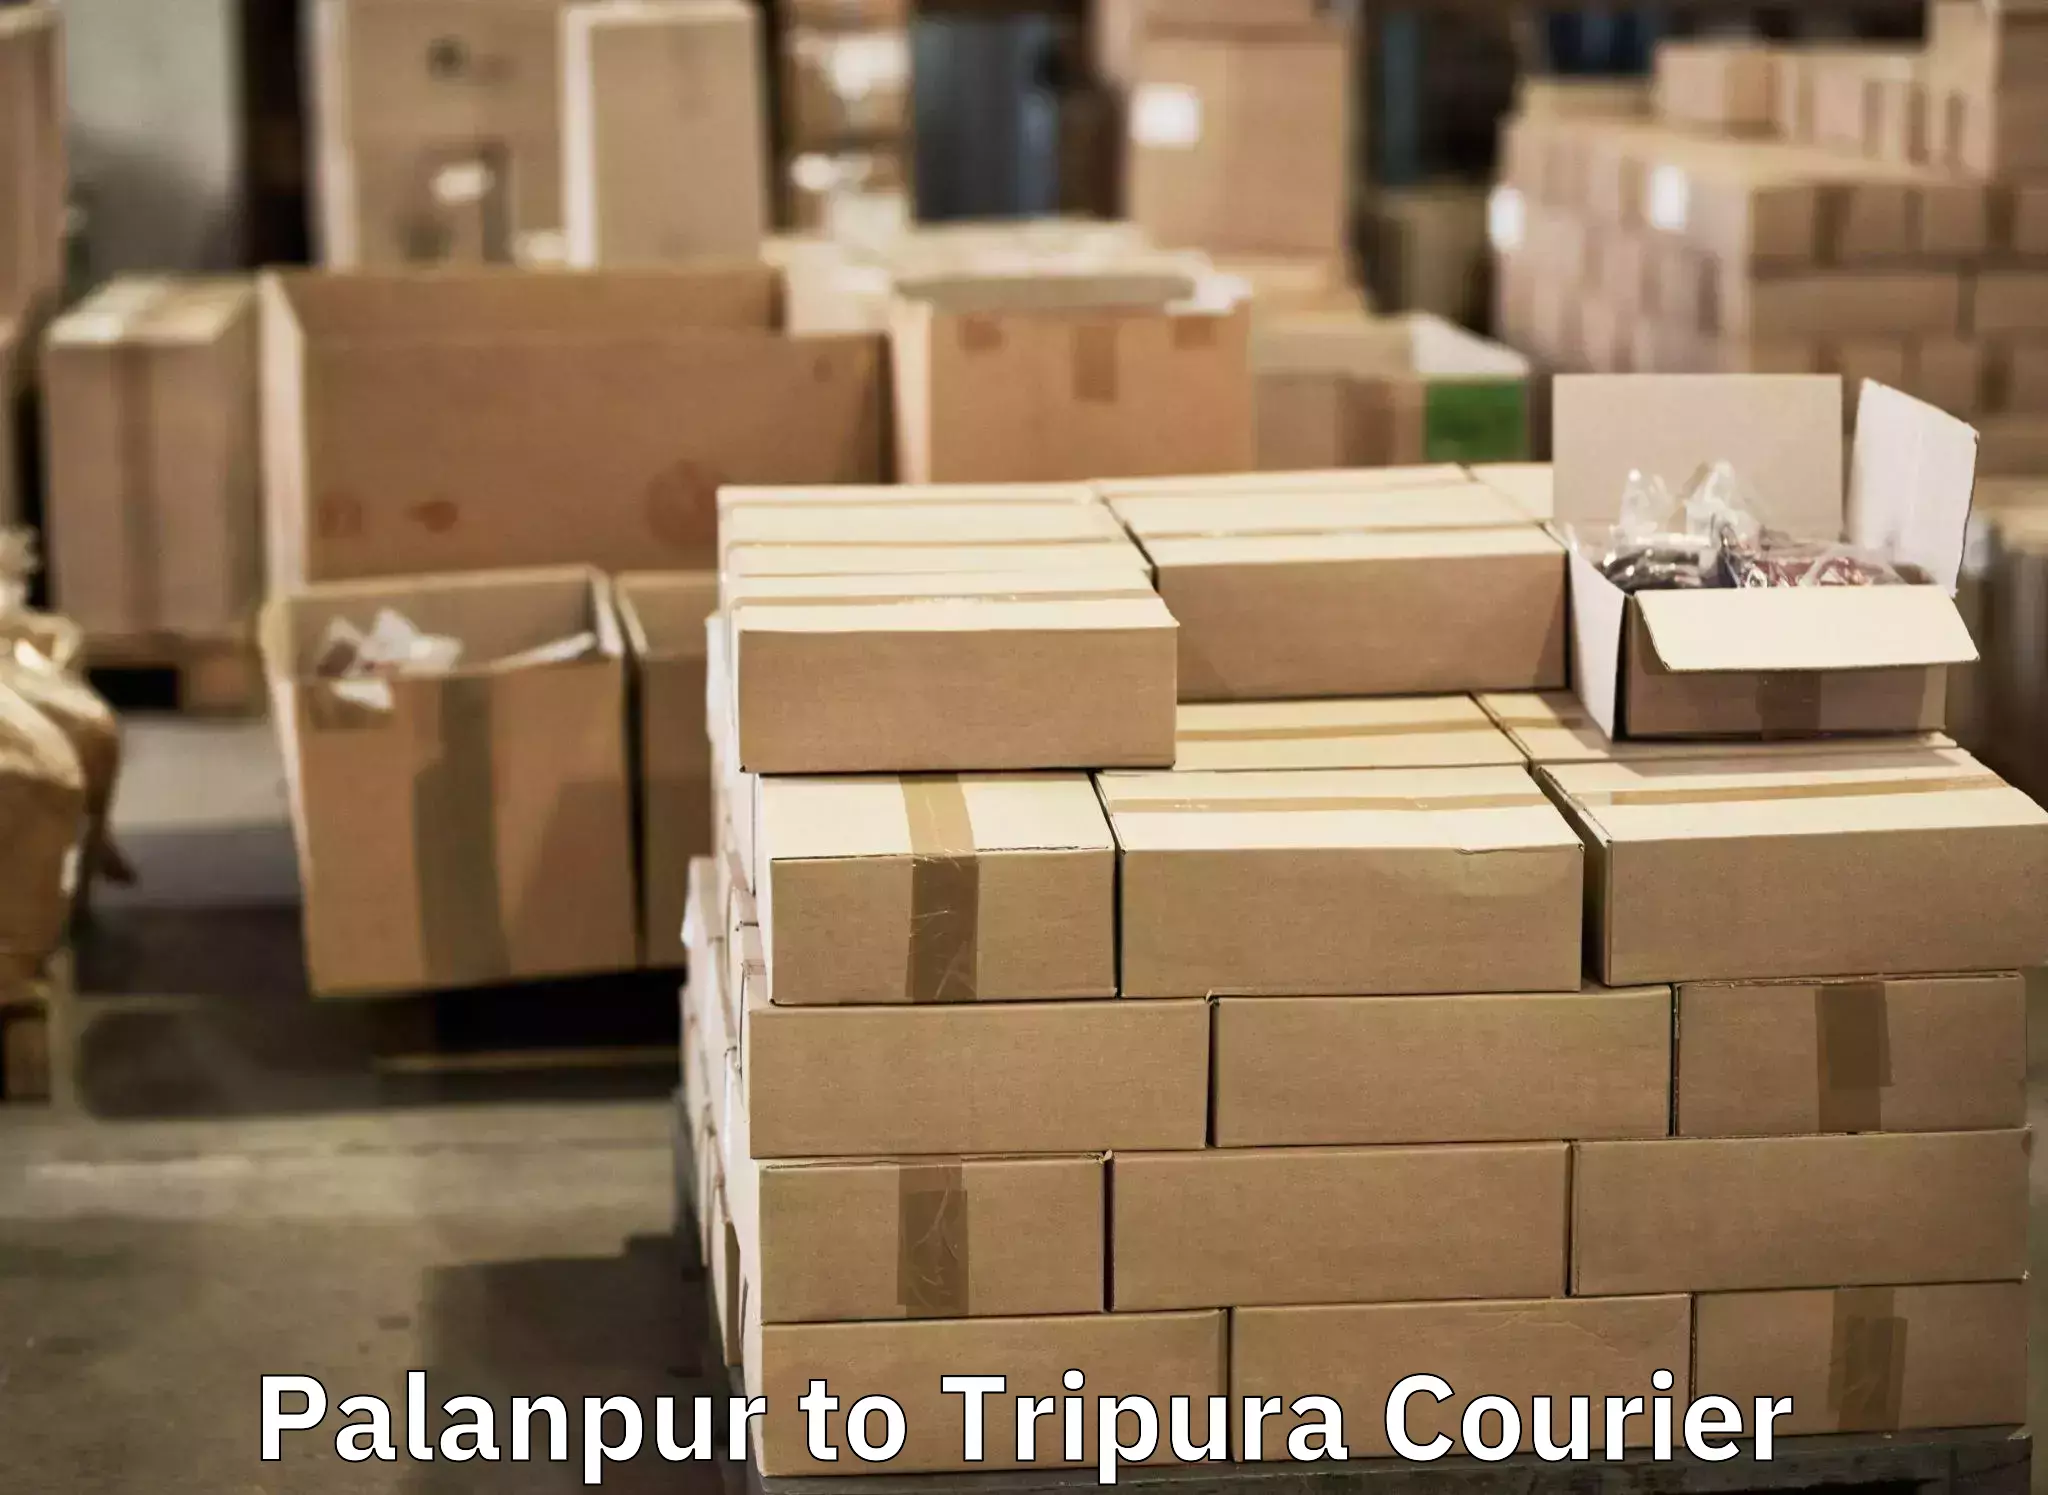 Luggage delivery providers Palanpur to Udaipur Tripura